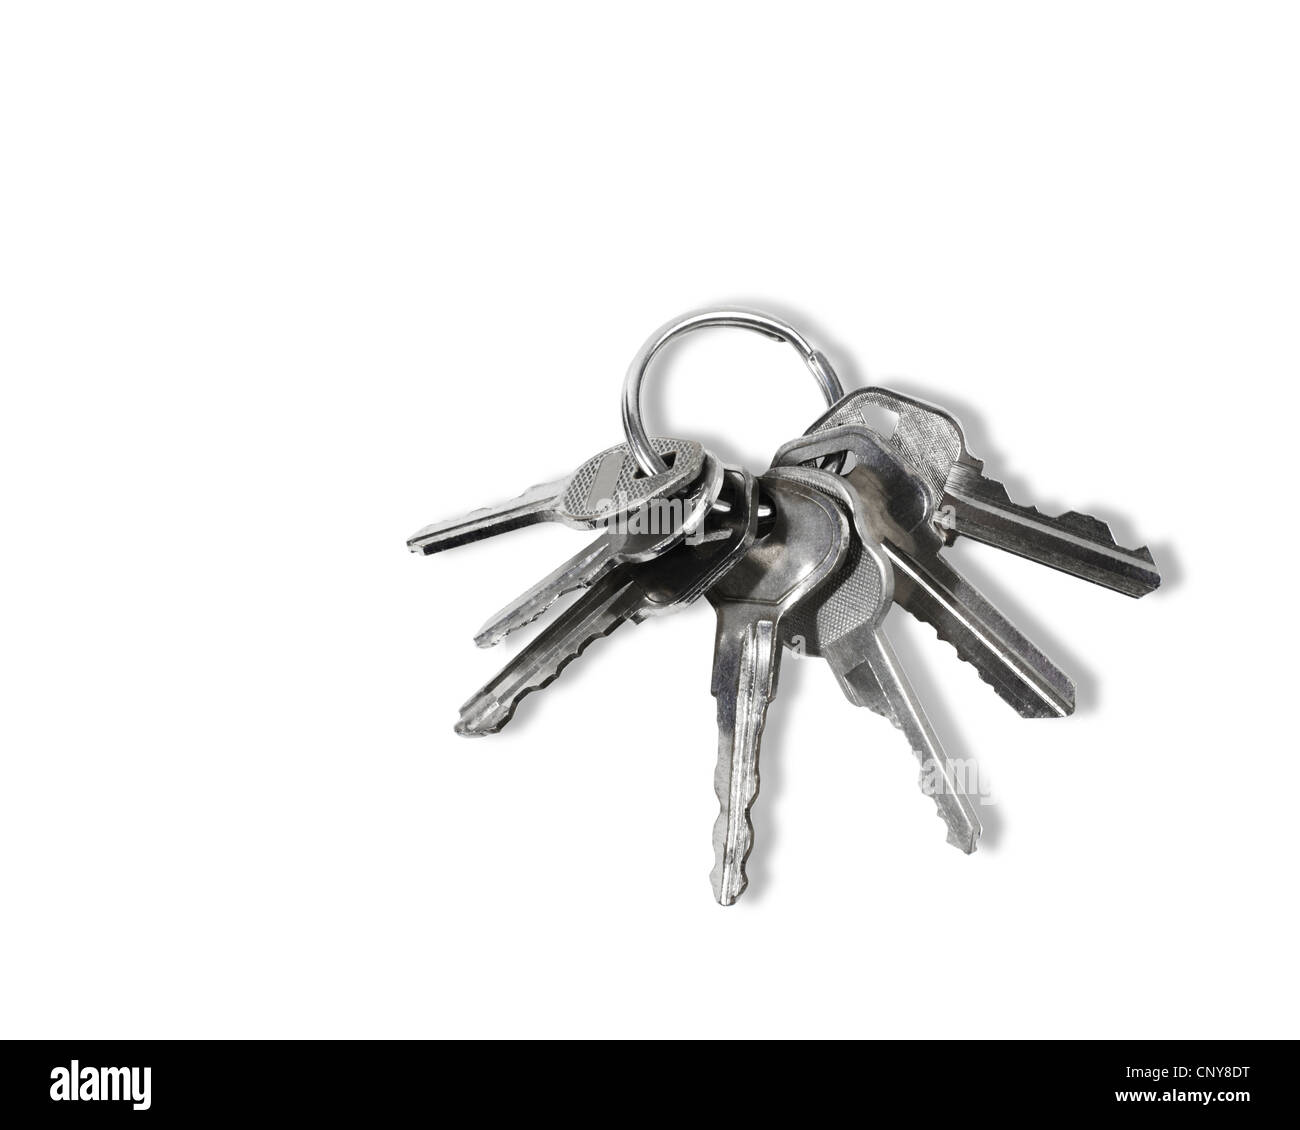 Studio shot of a Group of Keys on ring Stock Photo